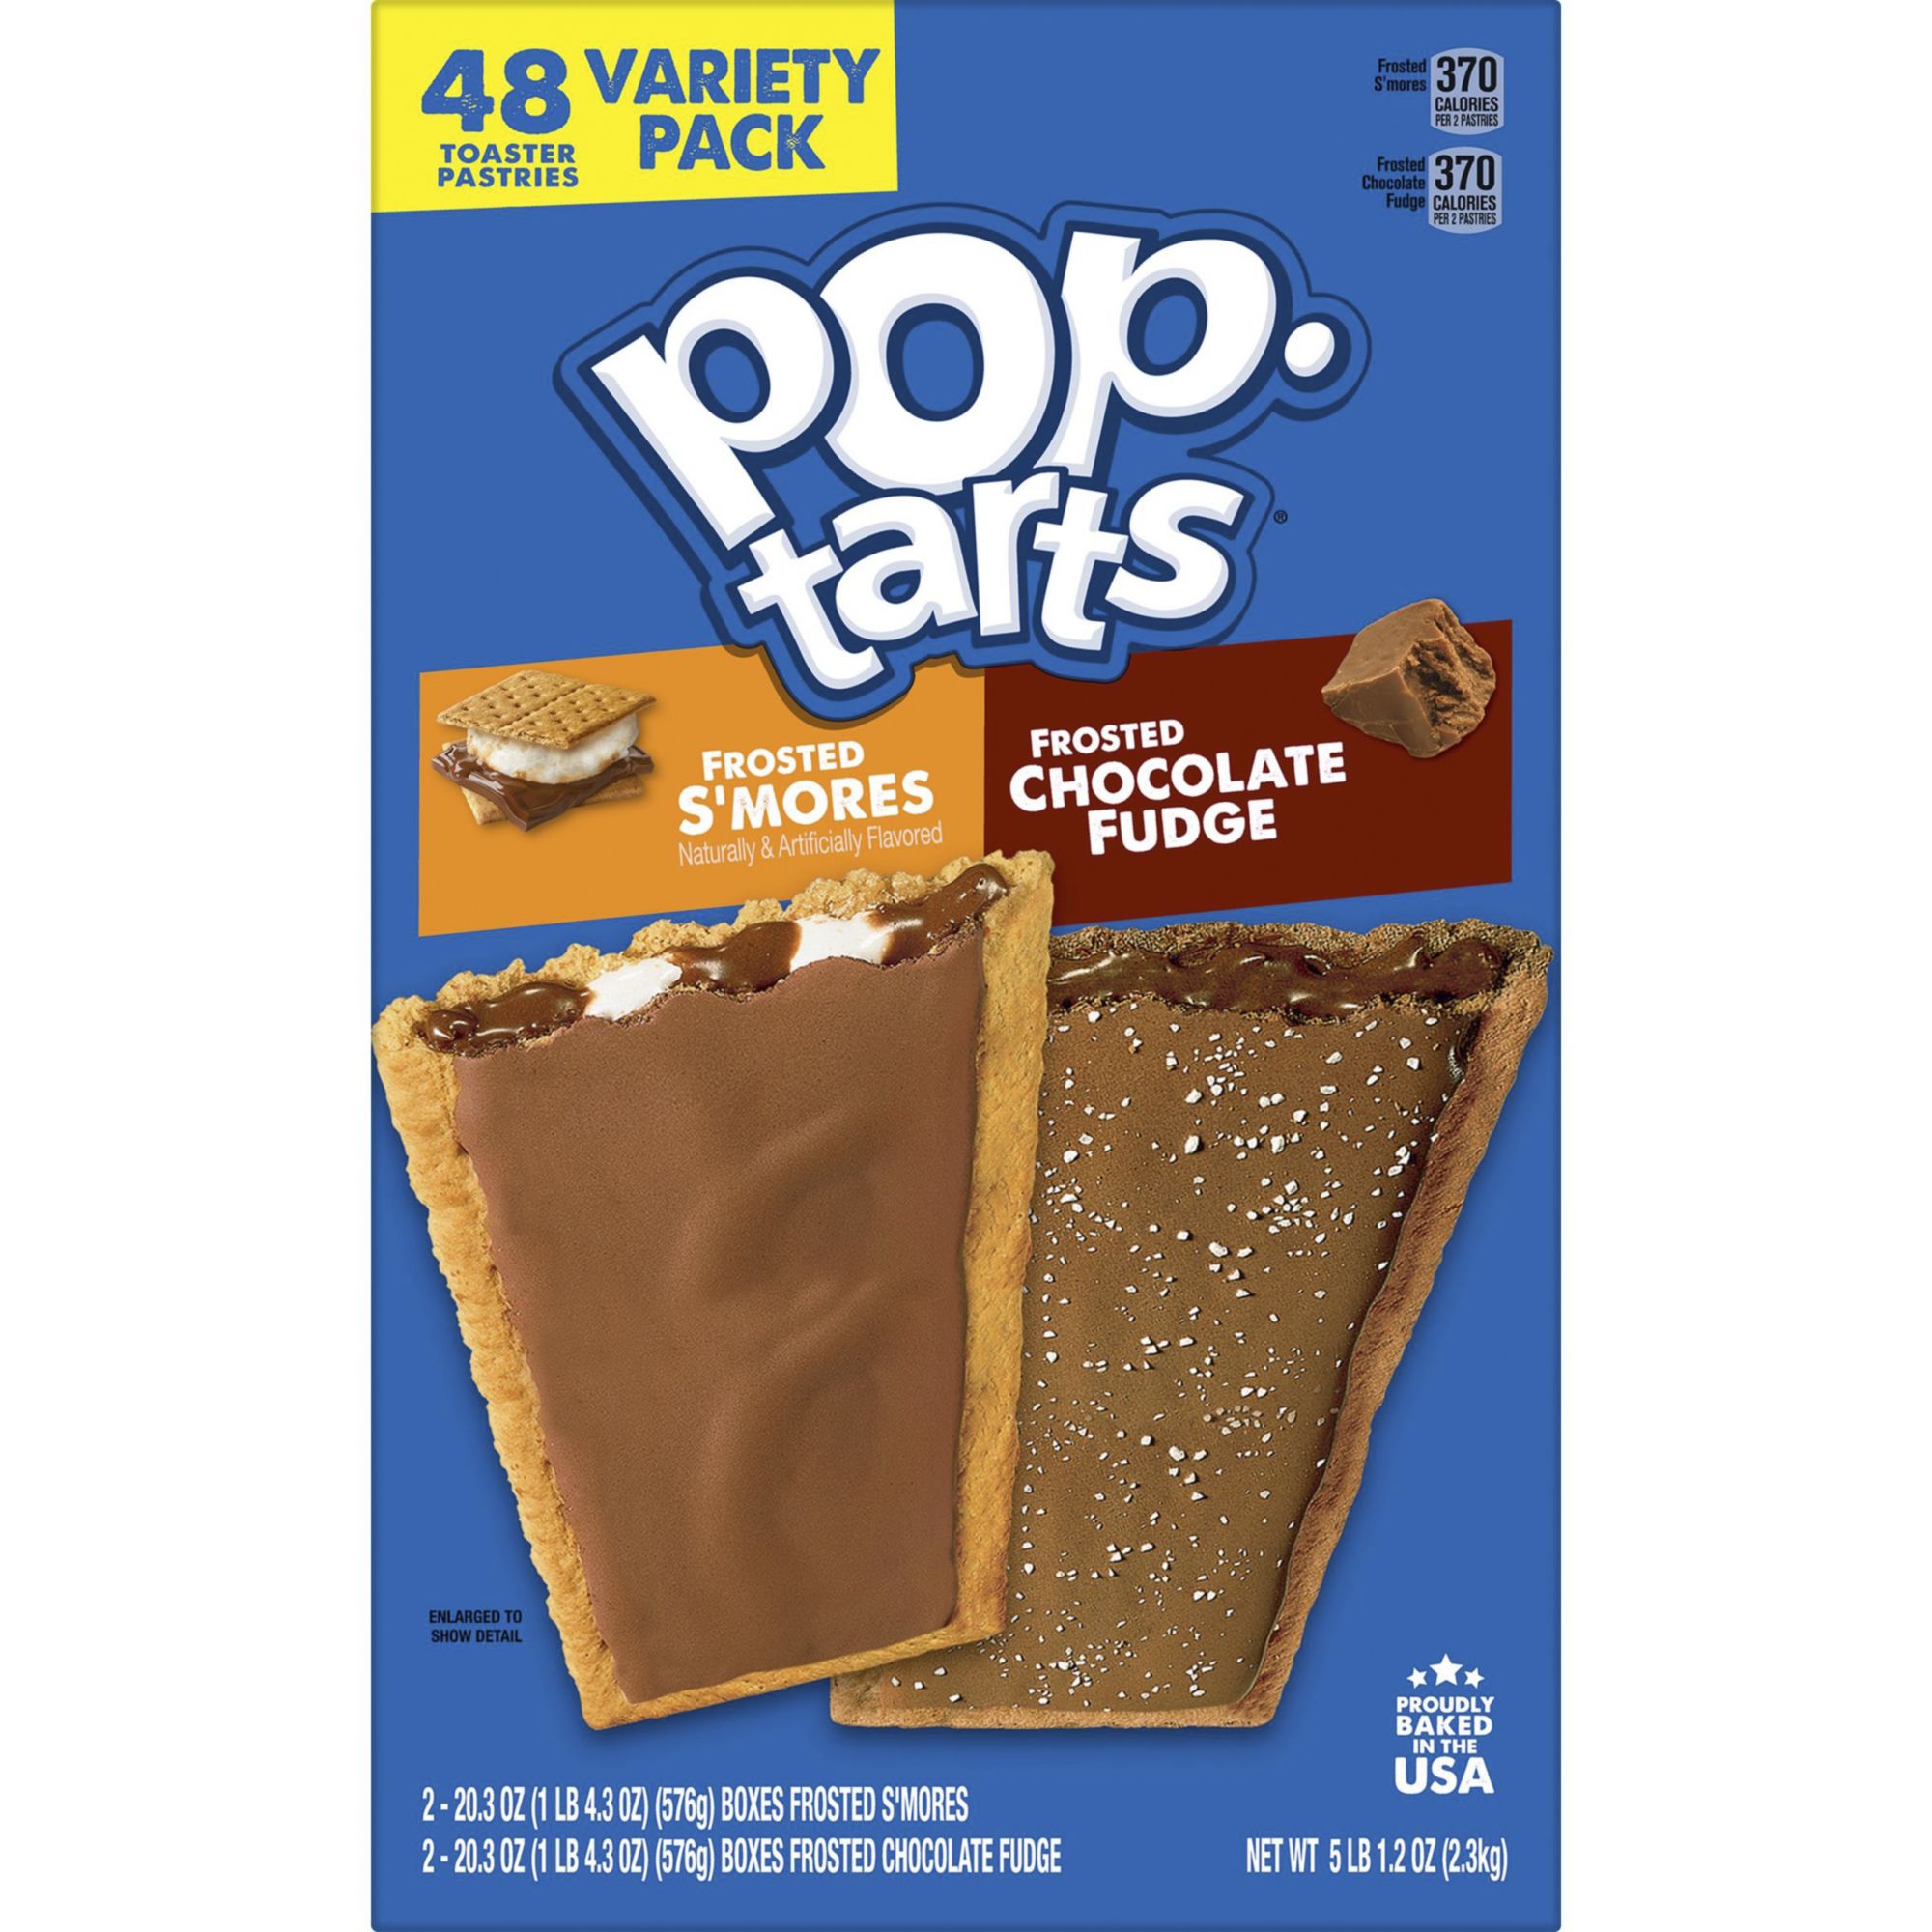 Kellogg's Pop-Tarts Frosted Toaster Pastries Frosted Brown Sugar  Cinnamon,1.76 Ounce (Pack of 36)